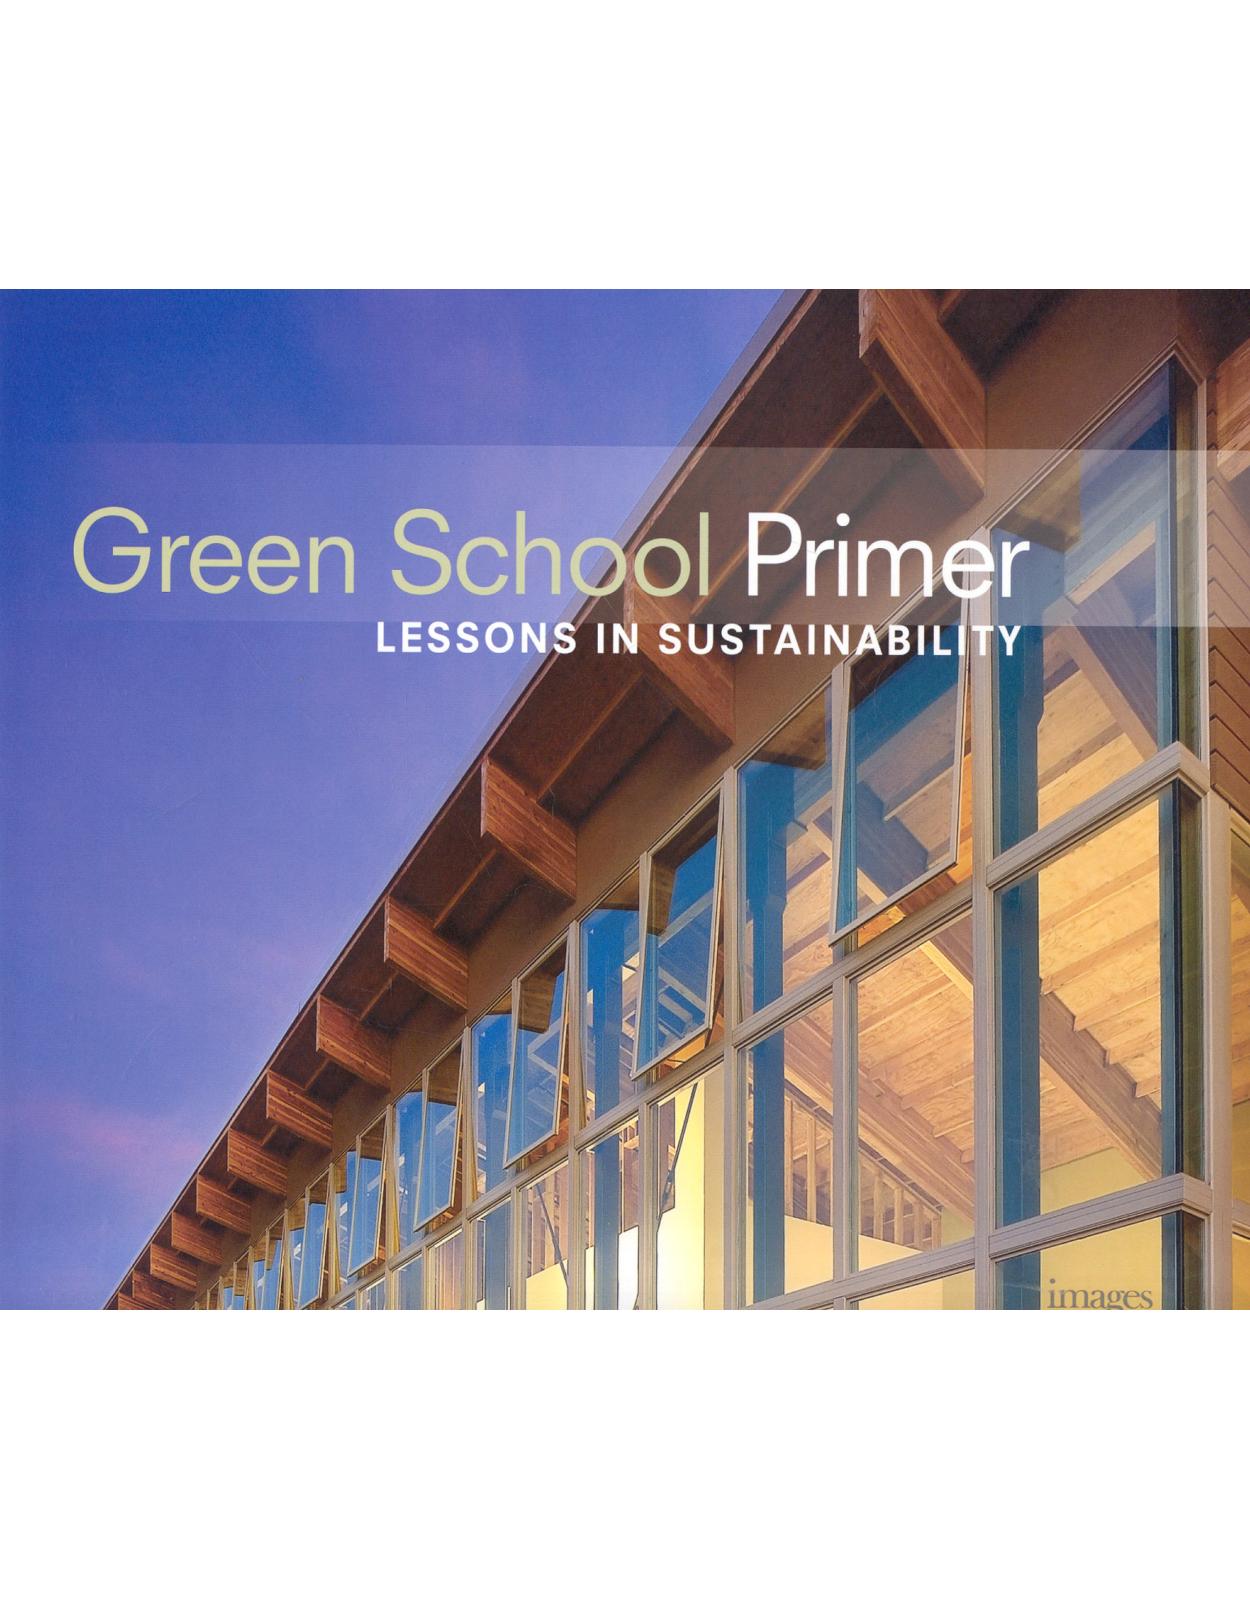 Green School Primer: Lessons in Sustainability (Architecture)